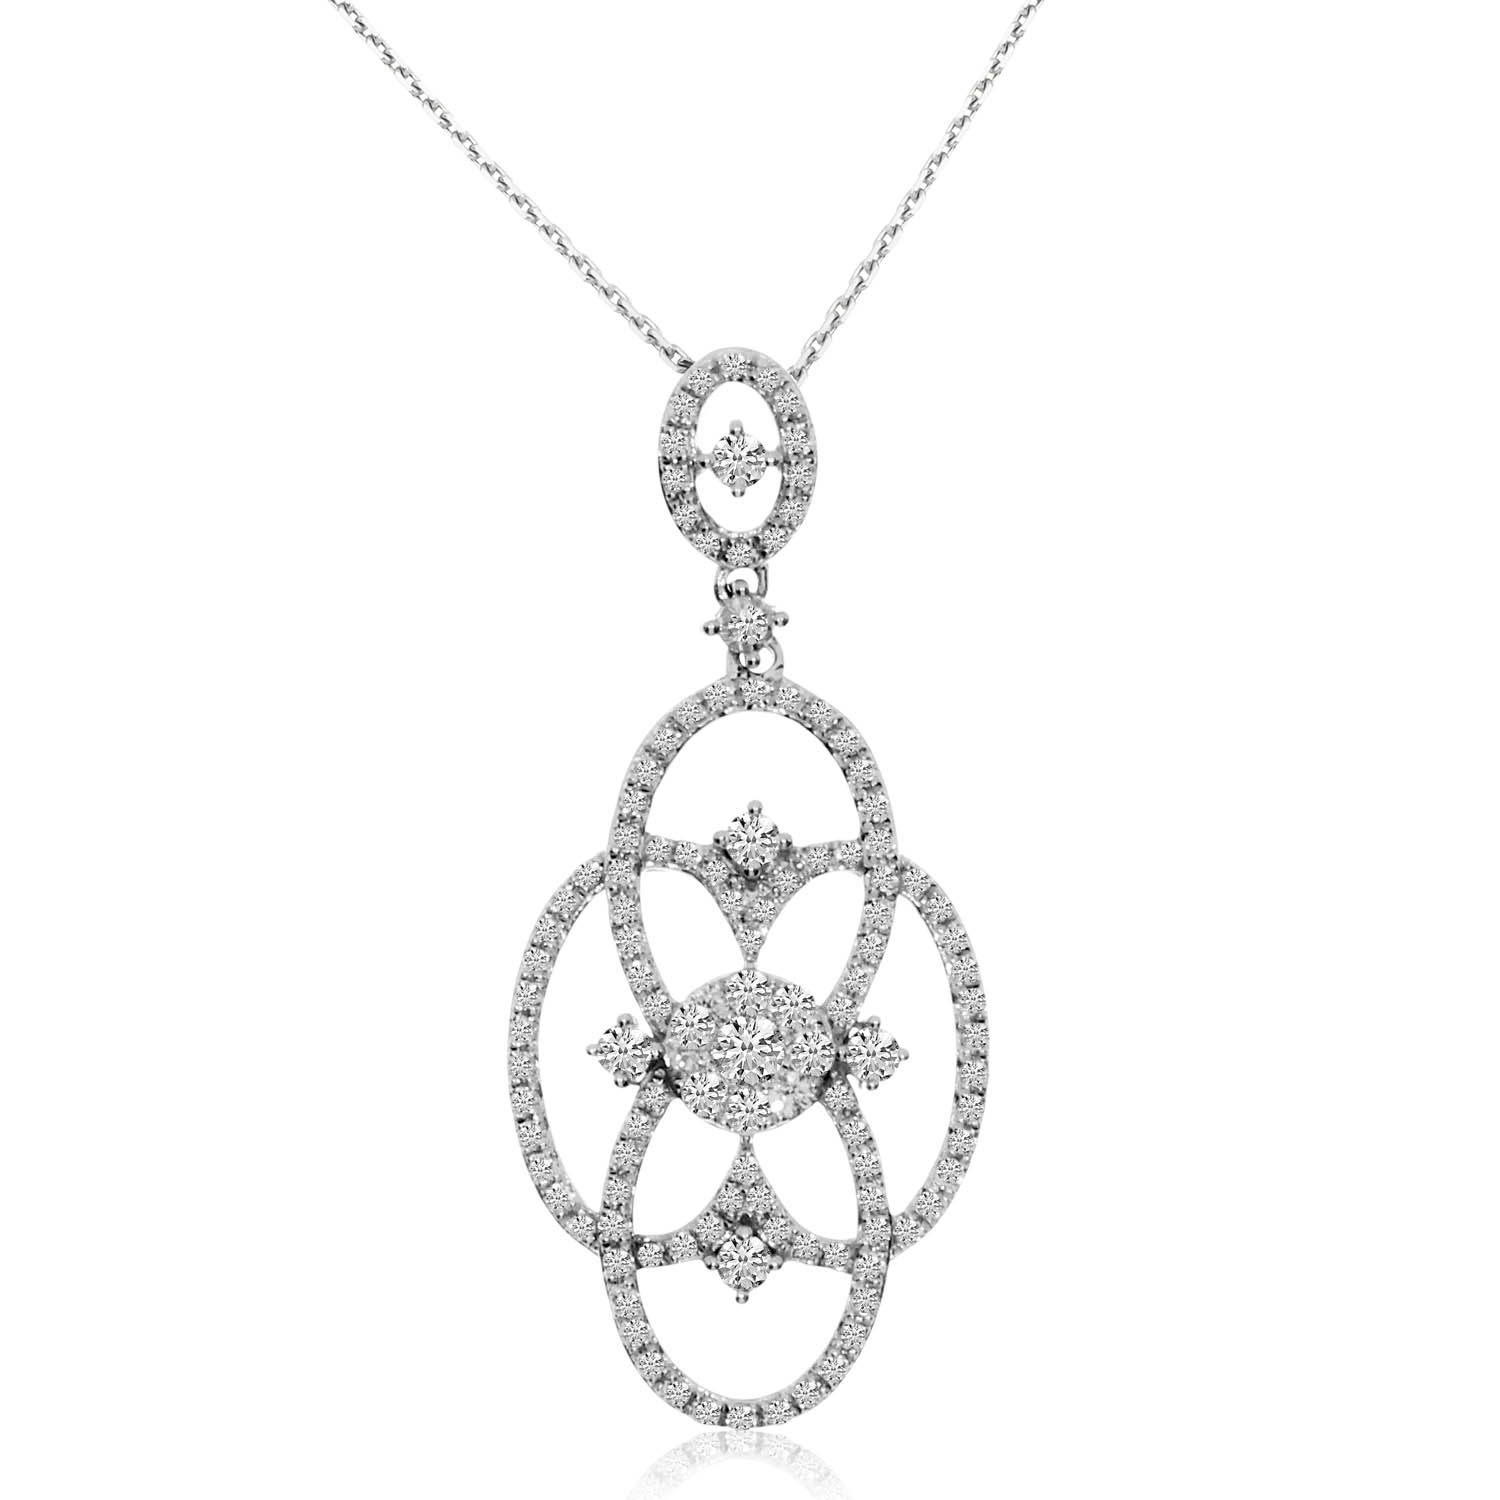 JCX3065: .71 carats of shimmering diamonds set in a 14k white gold fancy clustaire shaped pendant.